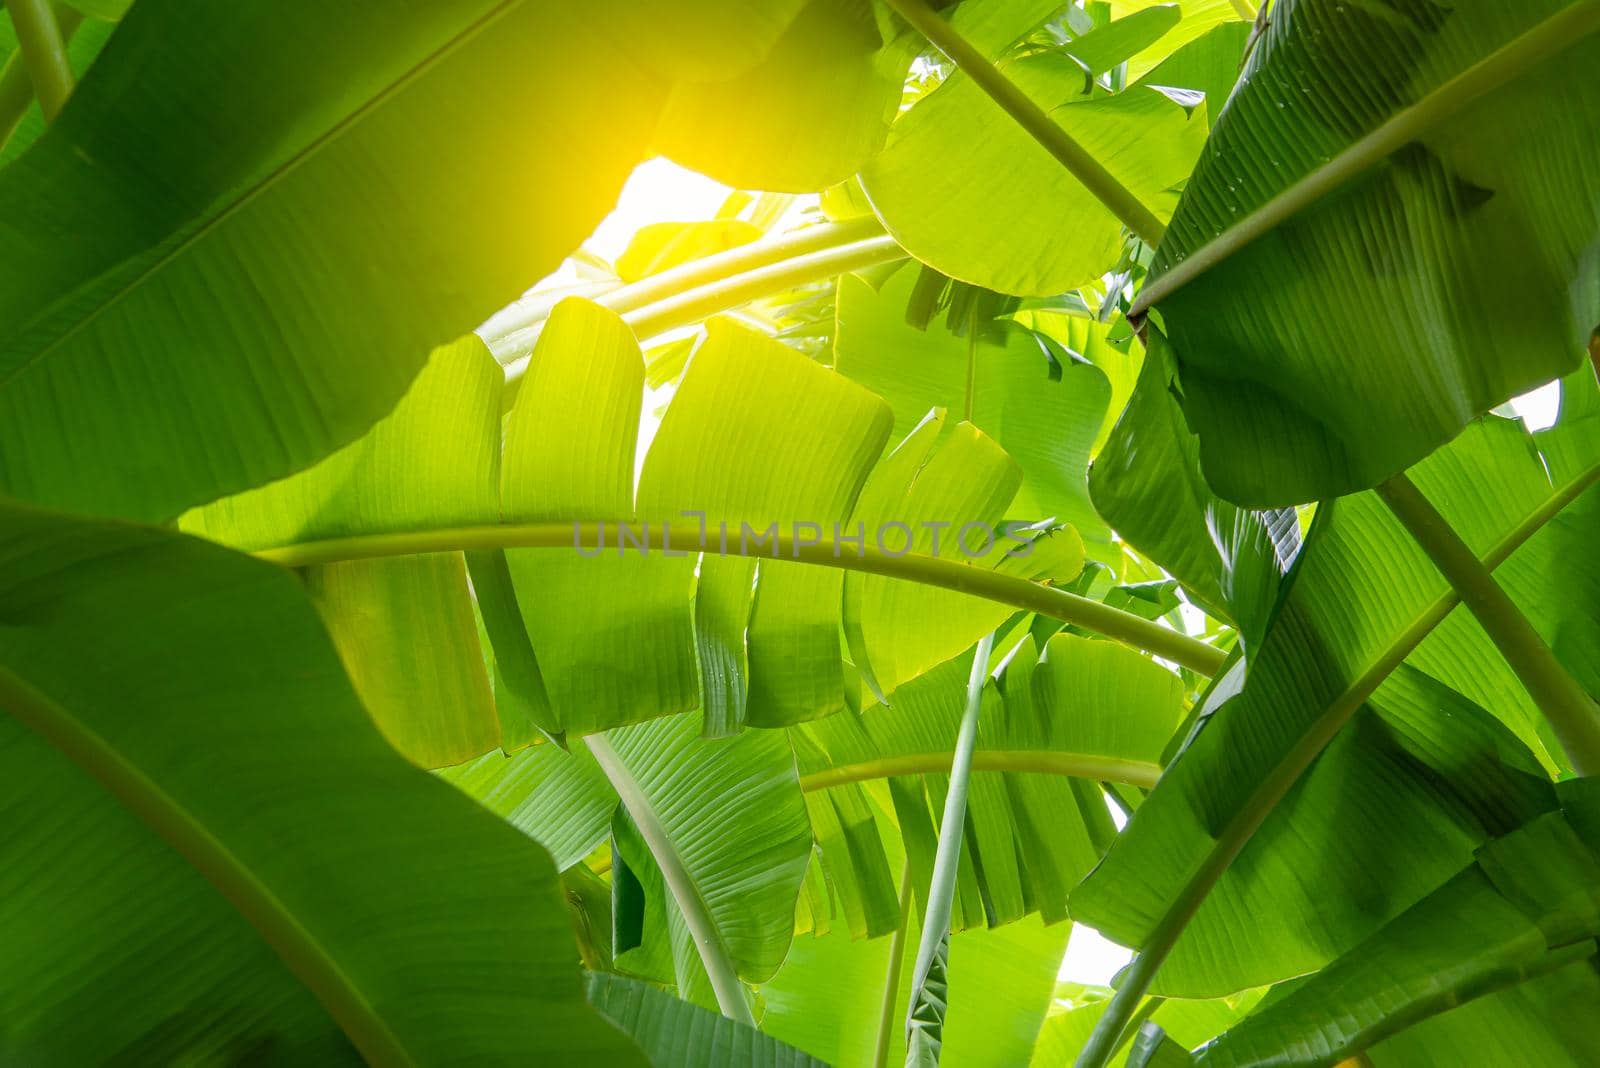 Greenery background nature plant and leaf (Banana) by NongEngEng